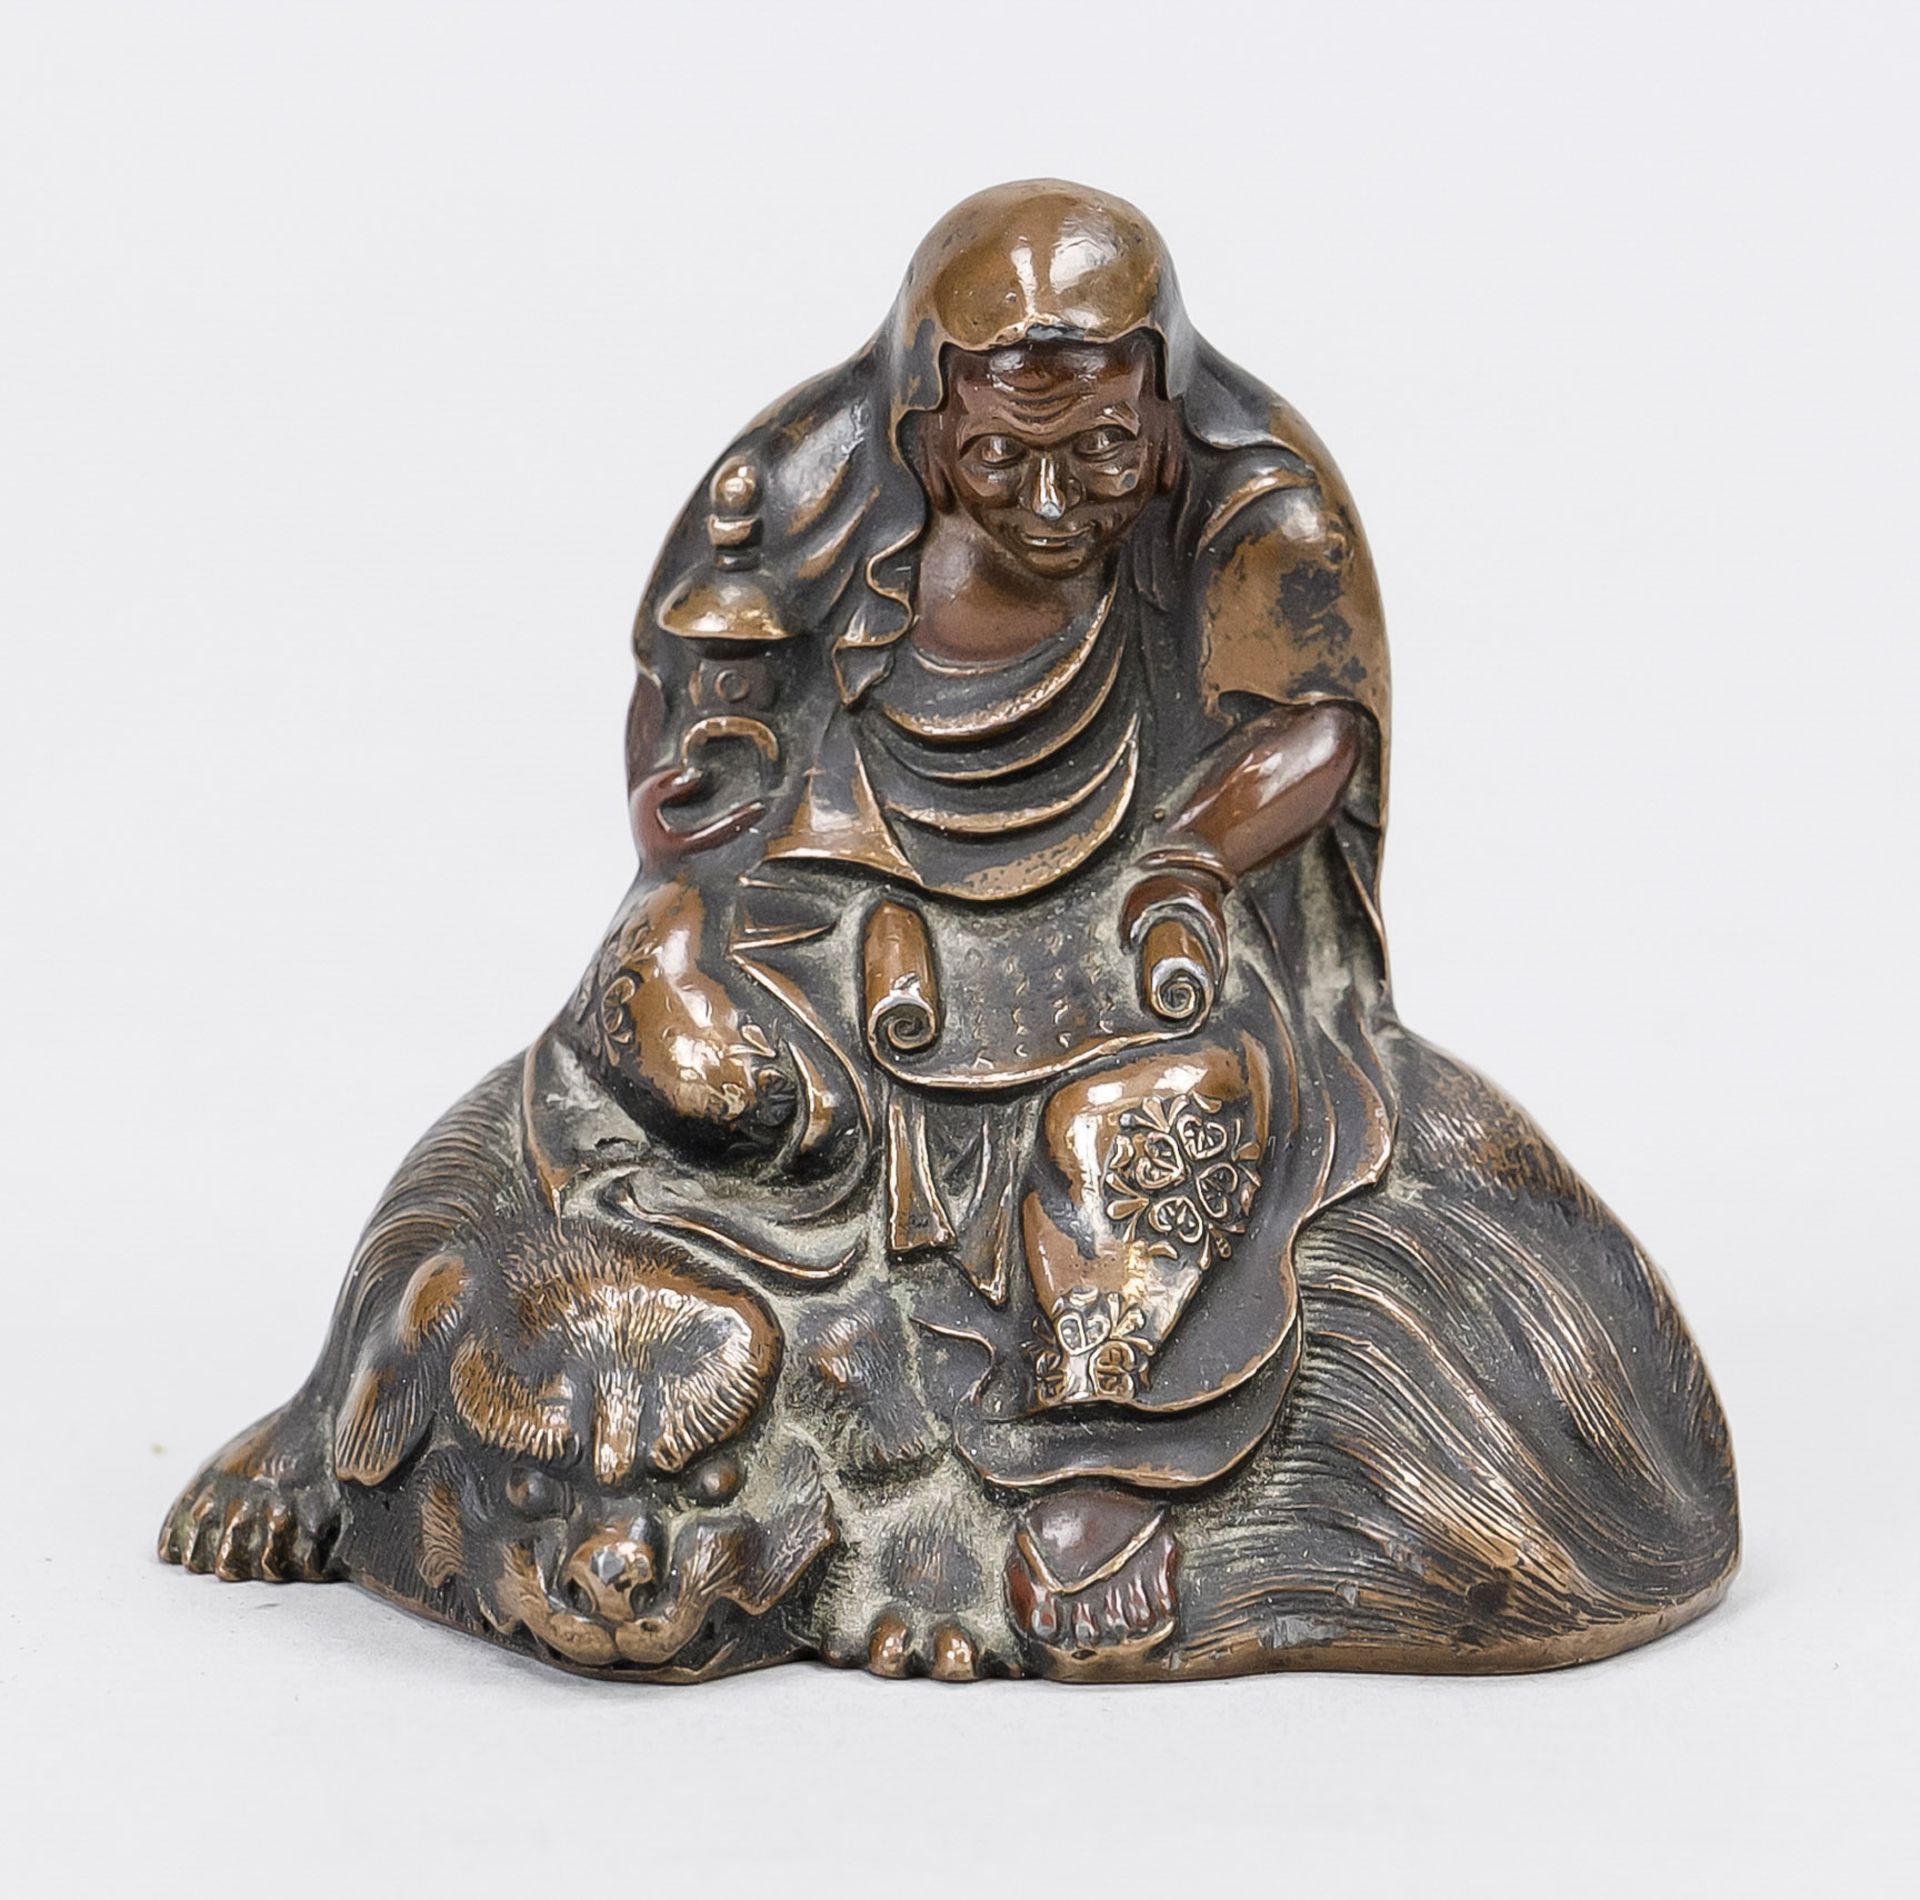 Small figure of a saint, probably China, probably 19th century, bronze. Sitting on an animal with